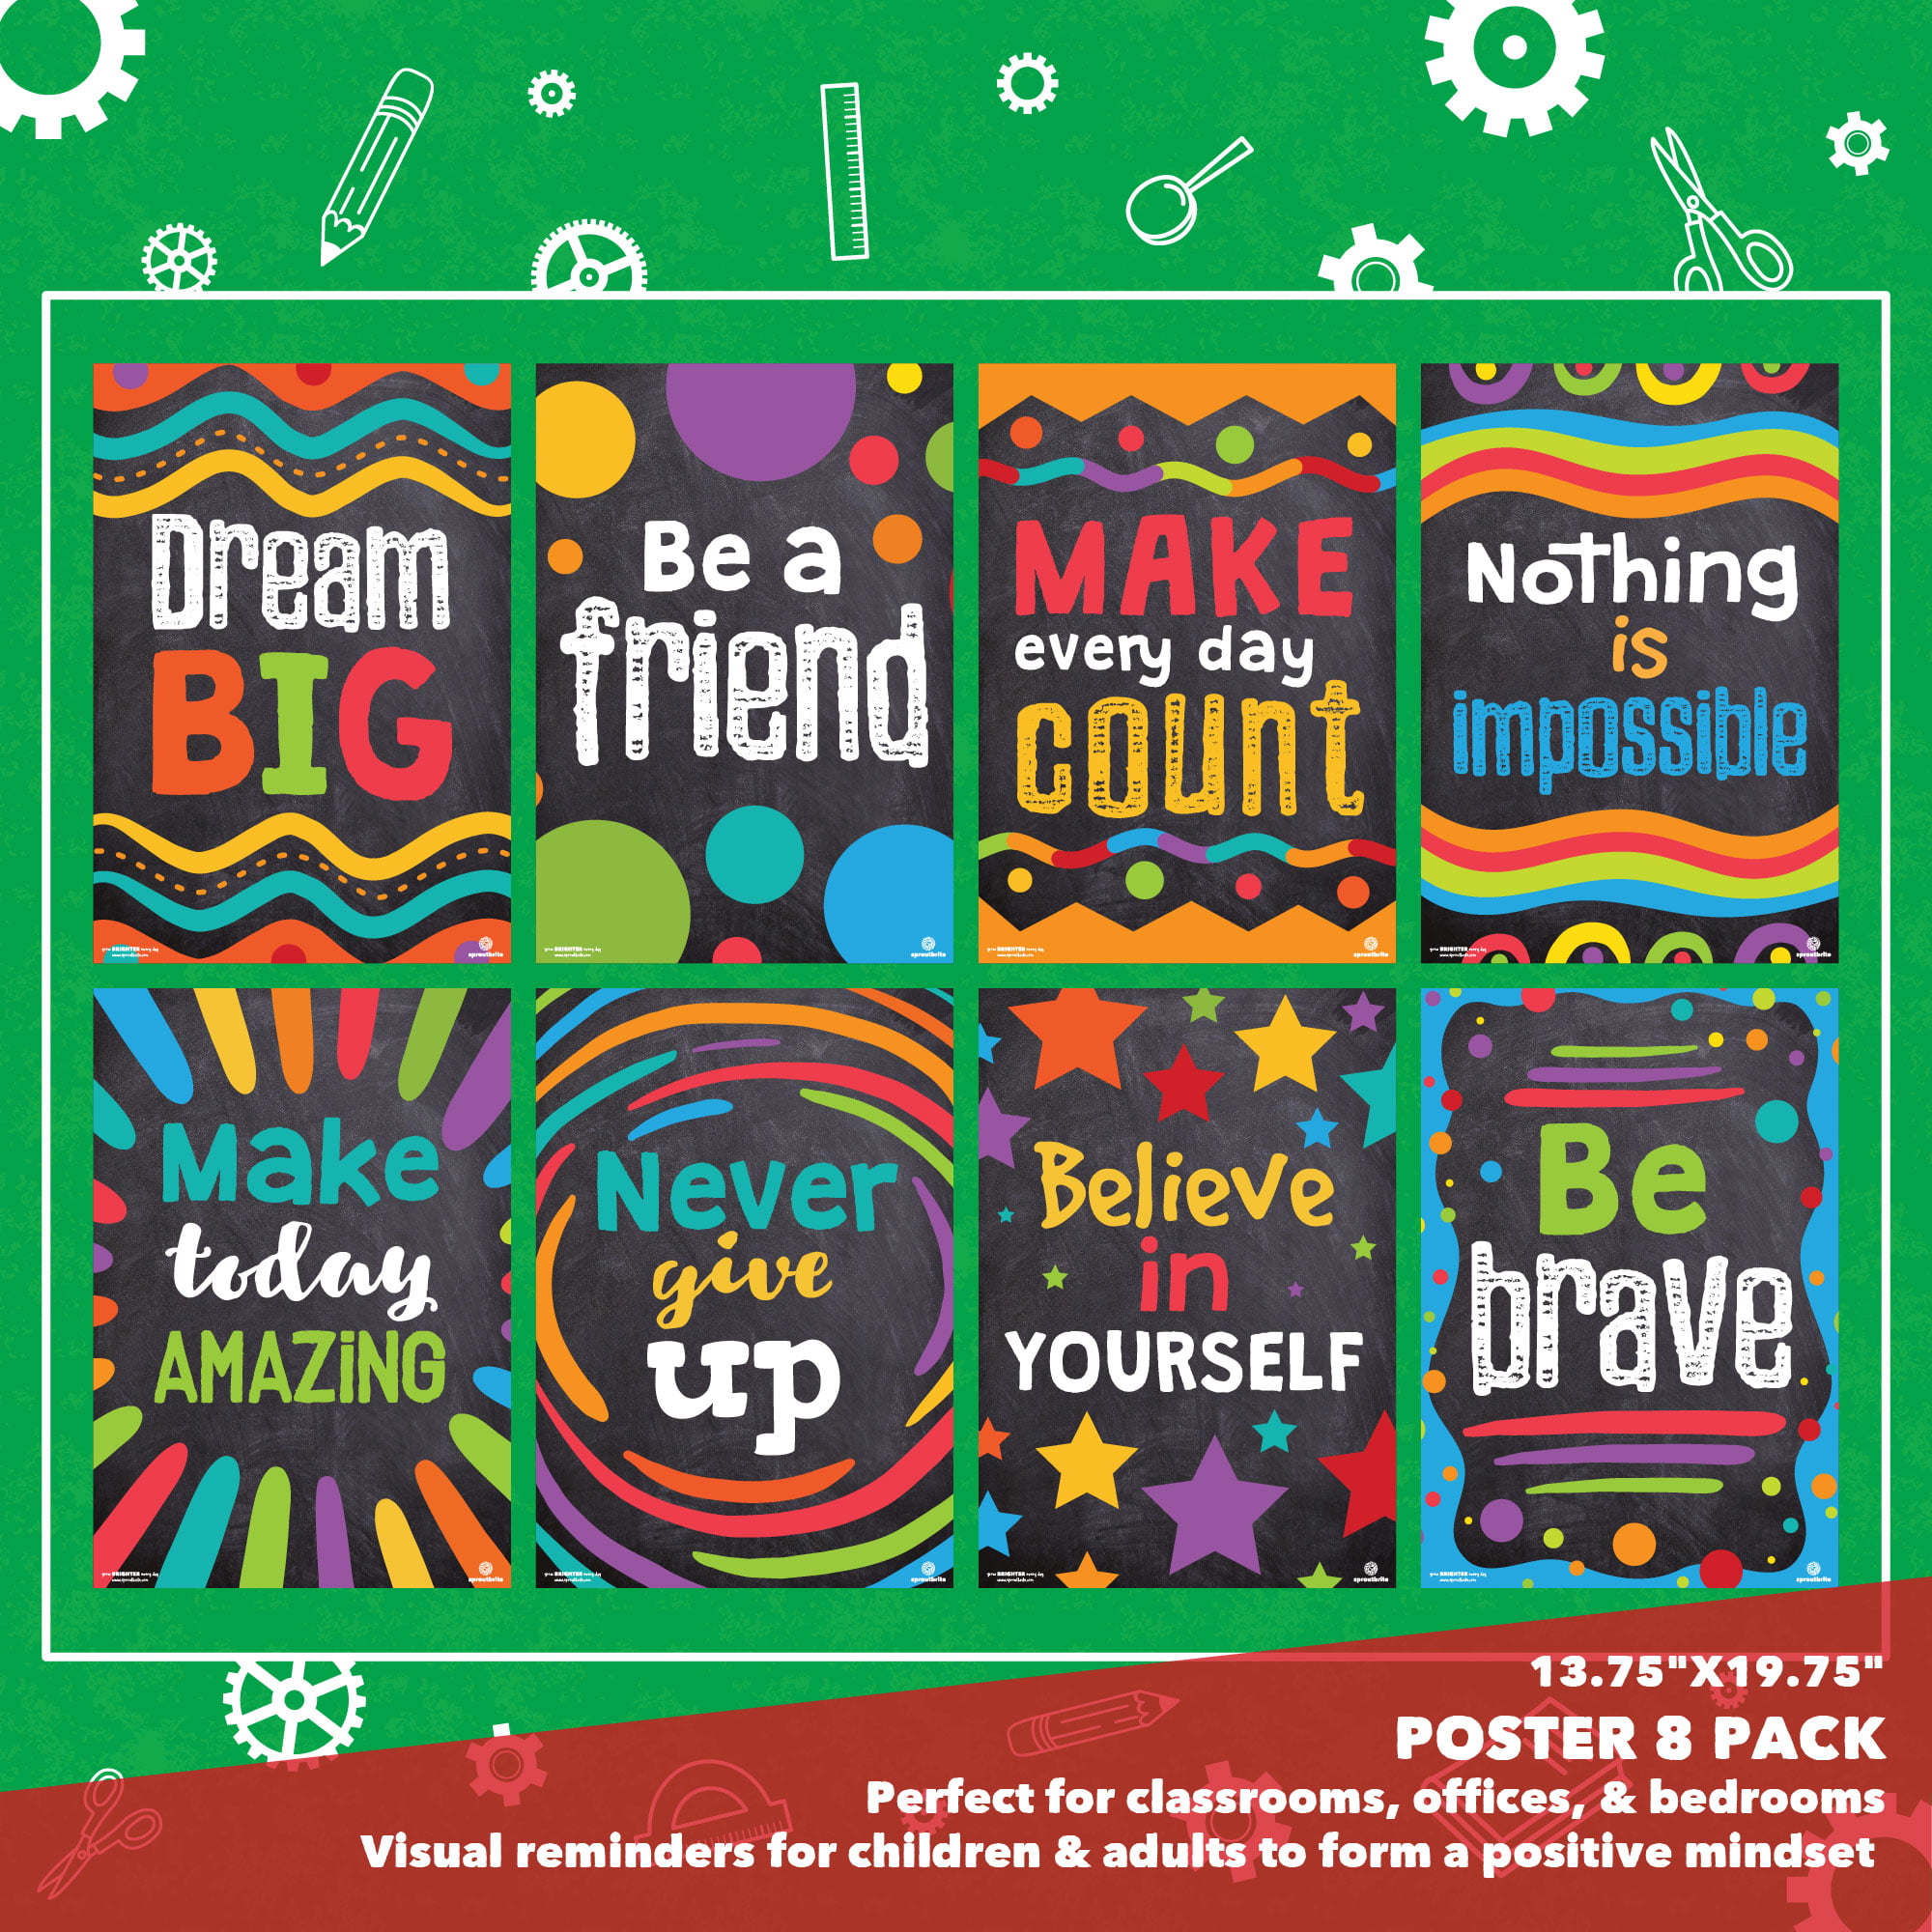 Positive Posters for Elementary/High School 24 Motivational Posters for Classroom Decor Inspirational Wall Art Teacher Classroom Office Supplies Growth Mindset Poster Bulletin Board Decorations 